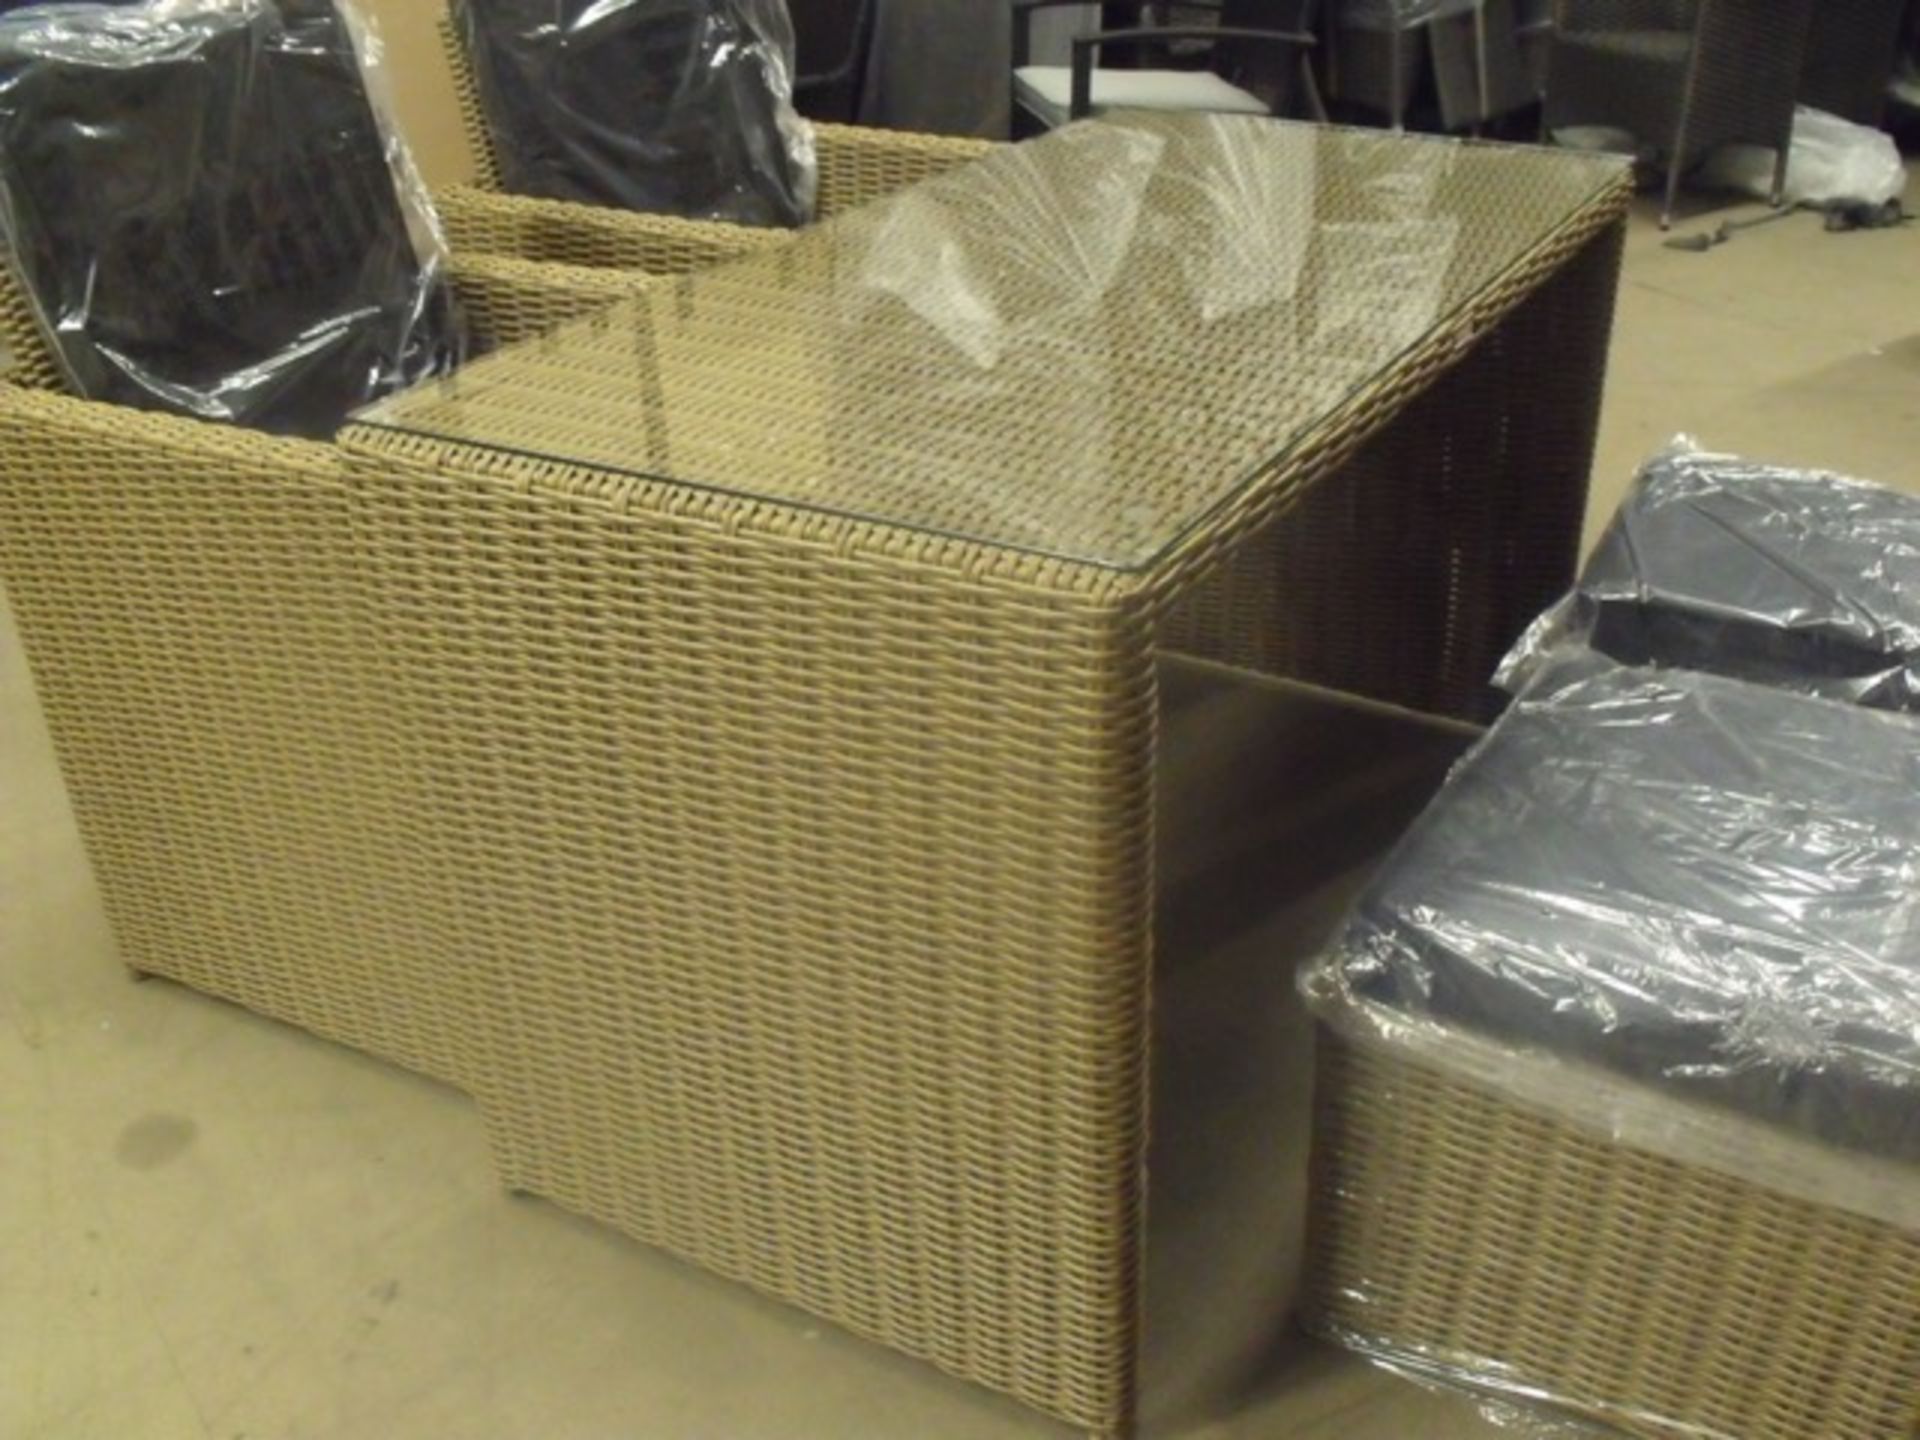 NEW Toscana balcony furniture set in Natural